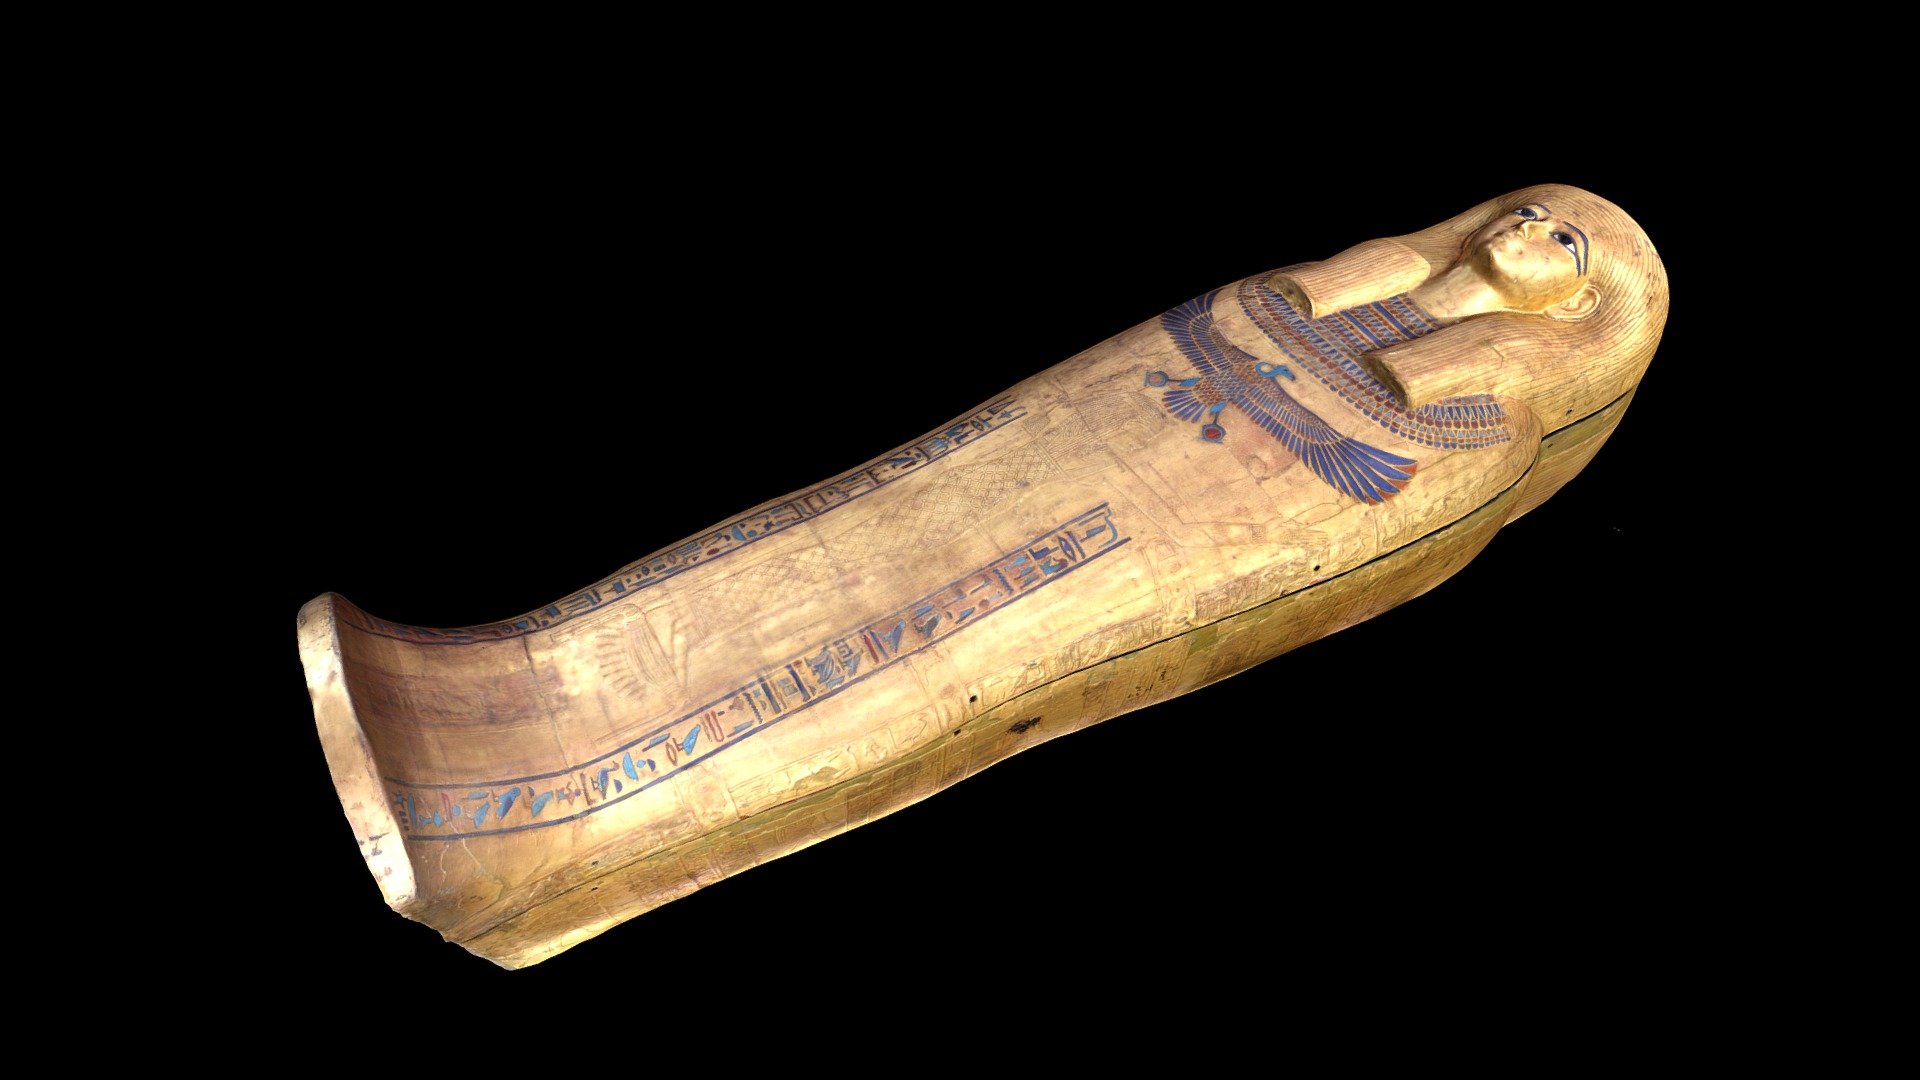 The innermost coffin of three of Yuya from his tomb in Egypt’s Valley of the Kings (KV46). The tomb was discovered in 1905 by James Quibell and contained the partially looted burials of Yuya and his wife Thuya of the 18th Dynasty. Yuya and Thuya were non-royal nobles and the parents of Queen Tiye who was the Great Royal Wife of Amenhotep III and mother of Akhenaten. The coffin is currently in the Egyptain Museum, Cairo, Egypt.

Created from 177 photographs (Canon EOS Rebel T5i) using Metashape 1.5.5. The base of the coffin was unavailable for scanning and has been reconstructed using Meshmixer 3.5 with texture touched up using Blender 2.8 Texture Painting. Photographed in November 2018 with very challenging lighting conditions from the LED &ldquo;uplighting